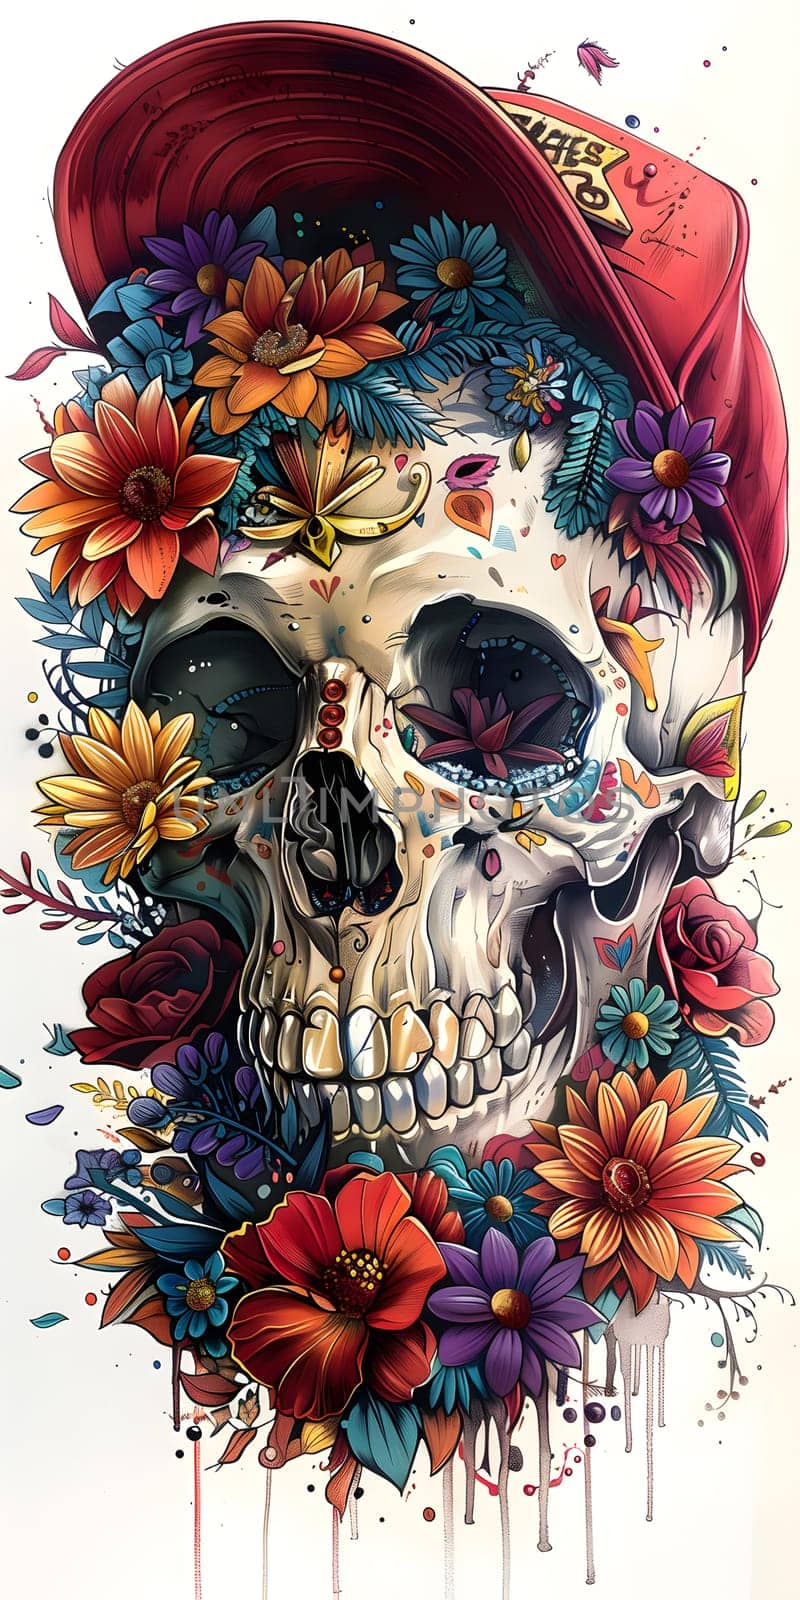 A flowersurrounded sugar skull with a red hat, an artistic illustration by Nadtochiy